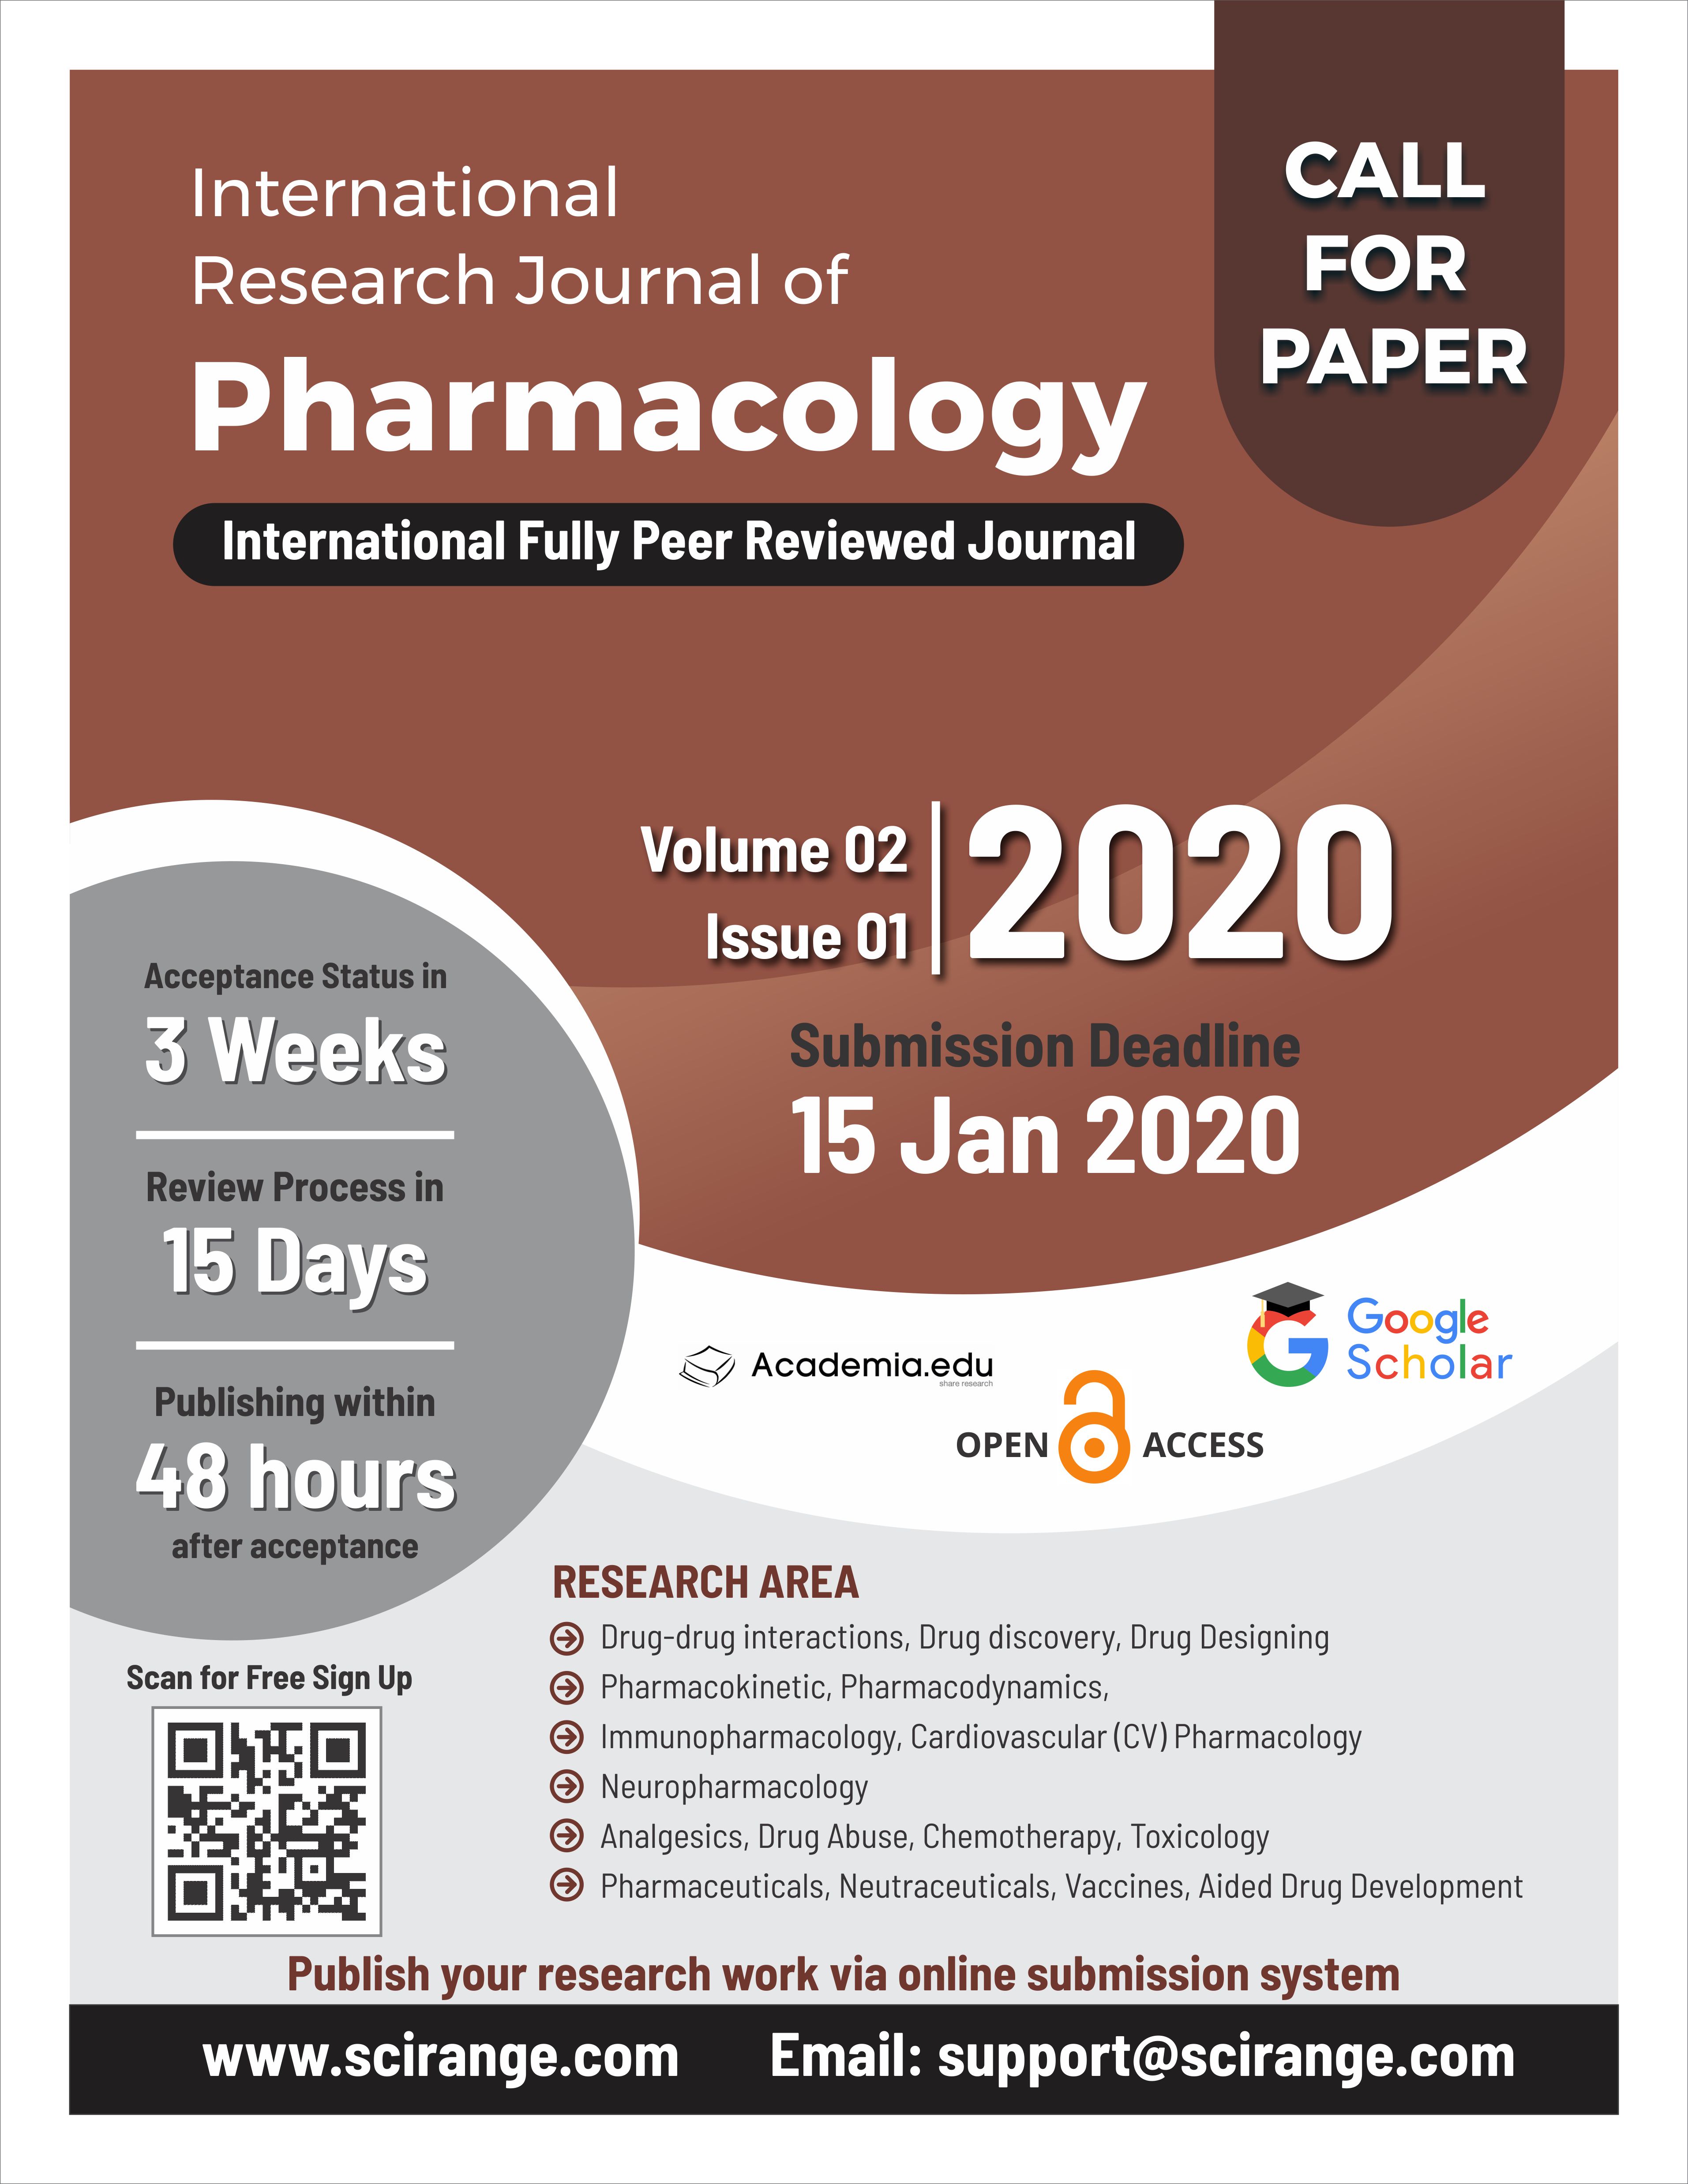 International Research Journal of Pharmacology